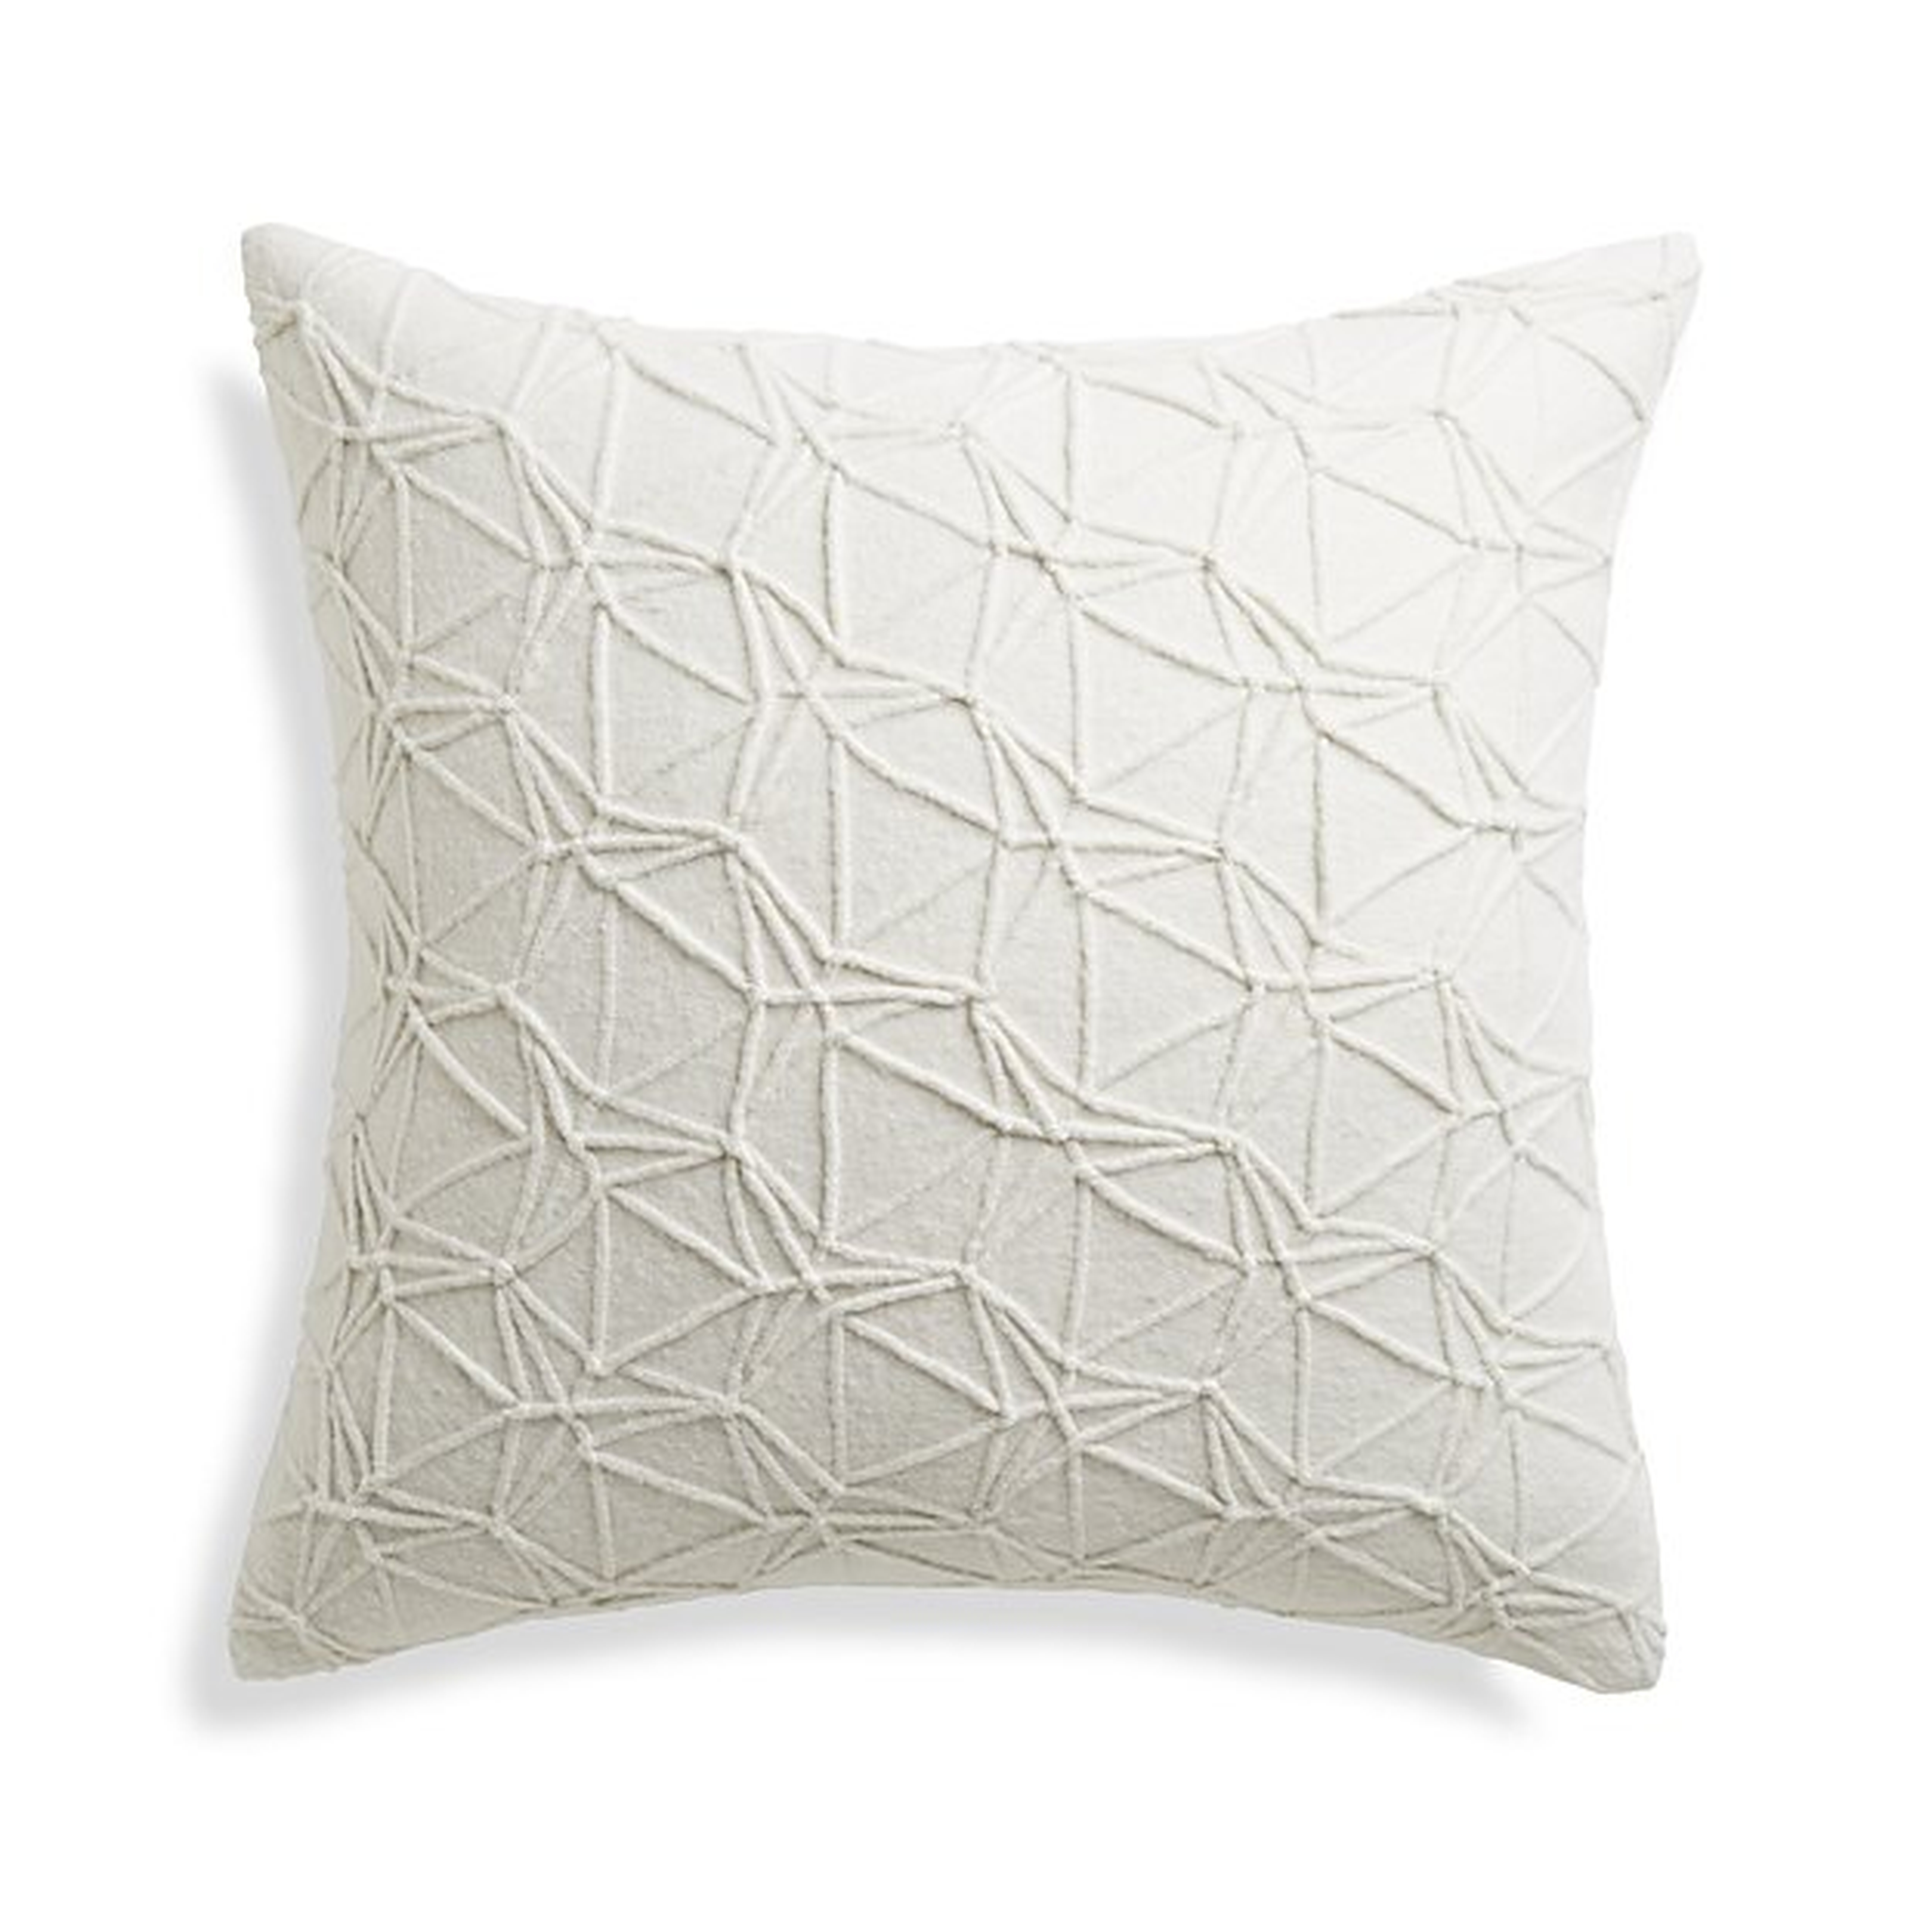 Cerci 18" Throw Pillow - Crate and Barrel